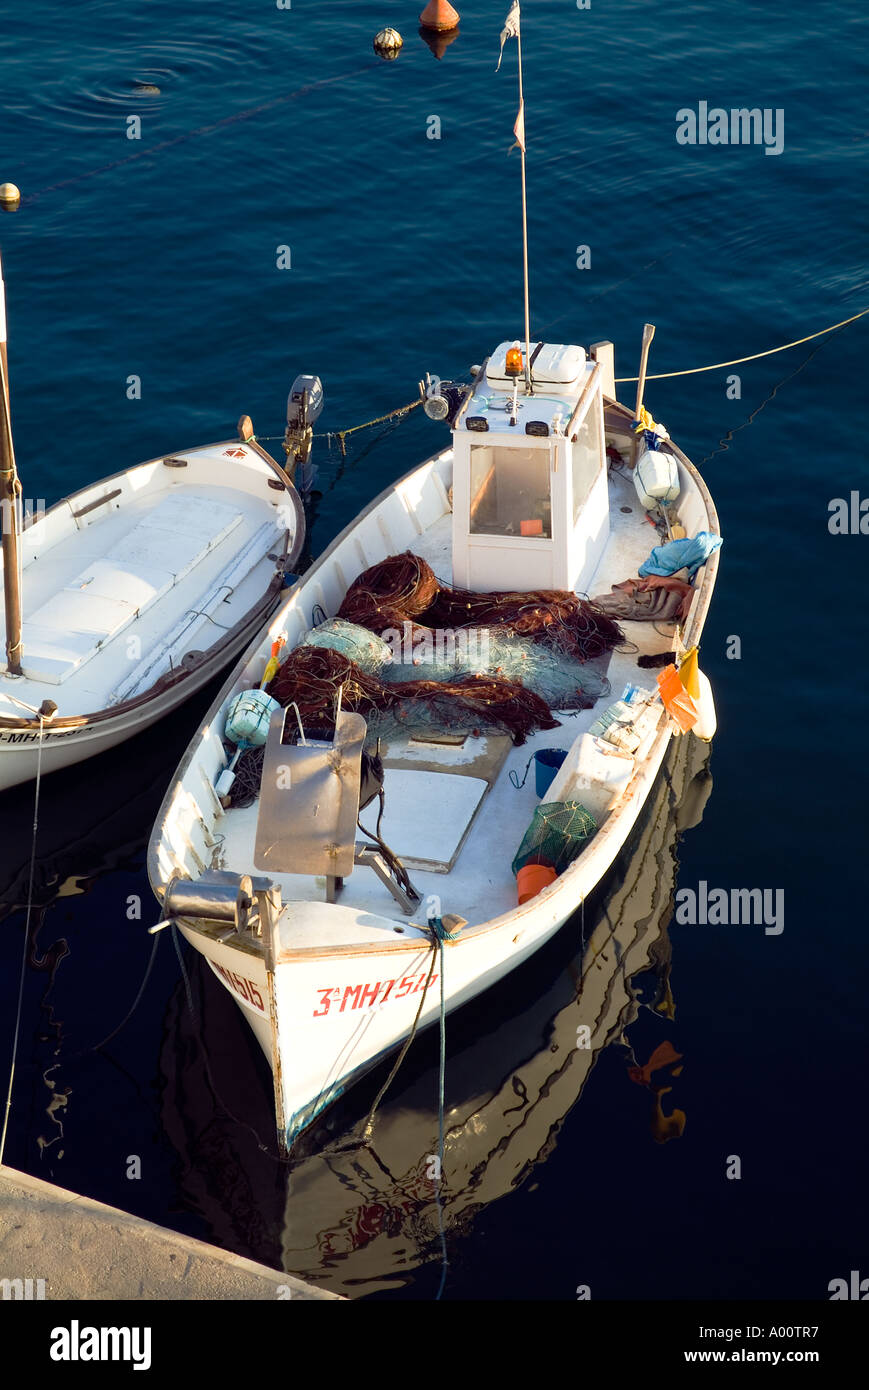 dh Cales Fonts ES CASTELL MENORCA Traditional Menorcan fishing boats fishingboats boat local fishery industry Stock Photo